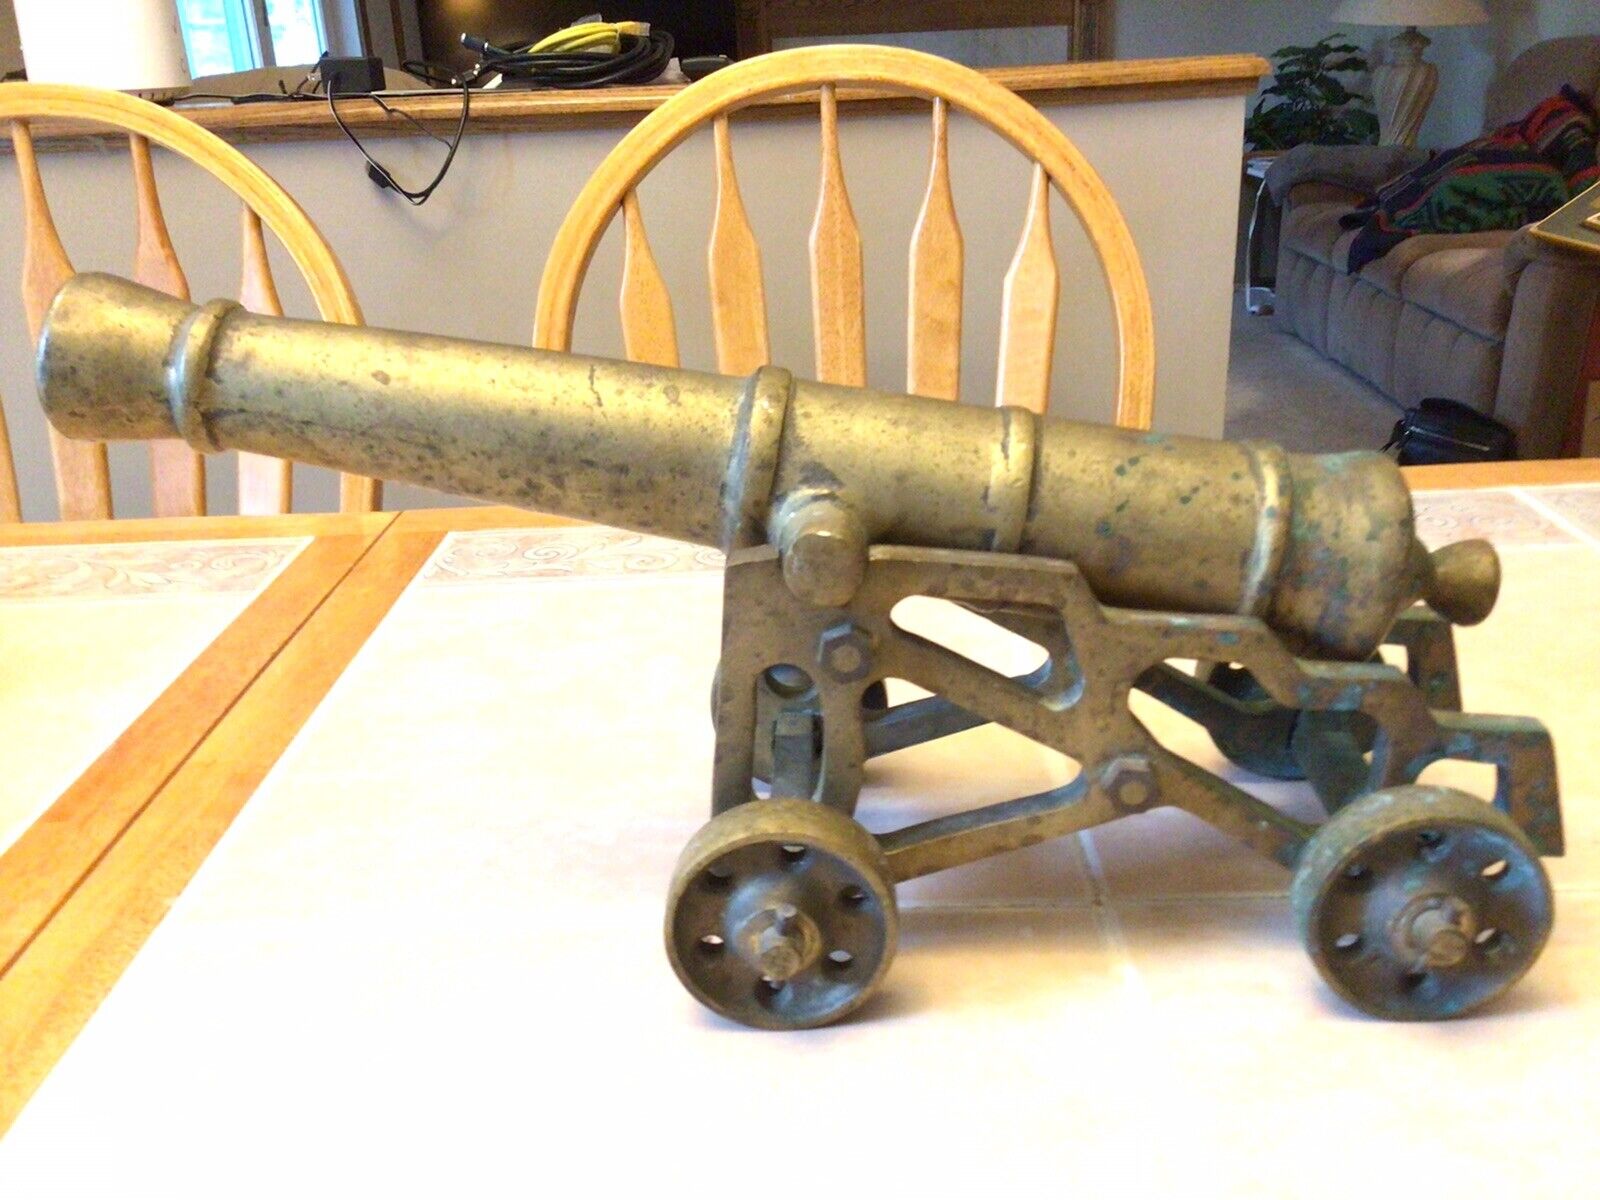 Vintage Decorative Bronze Cannon On Carrier (22.5 Lbs)